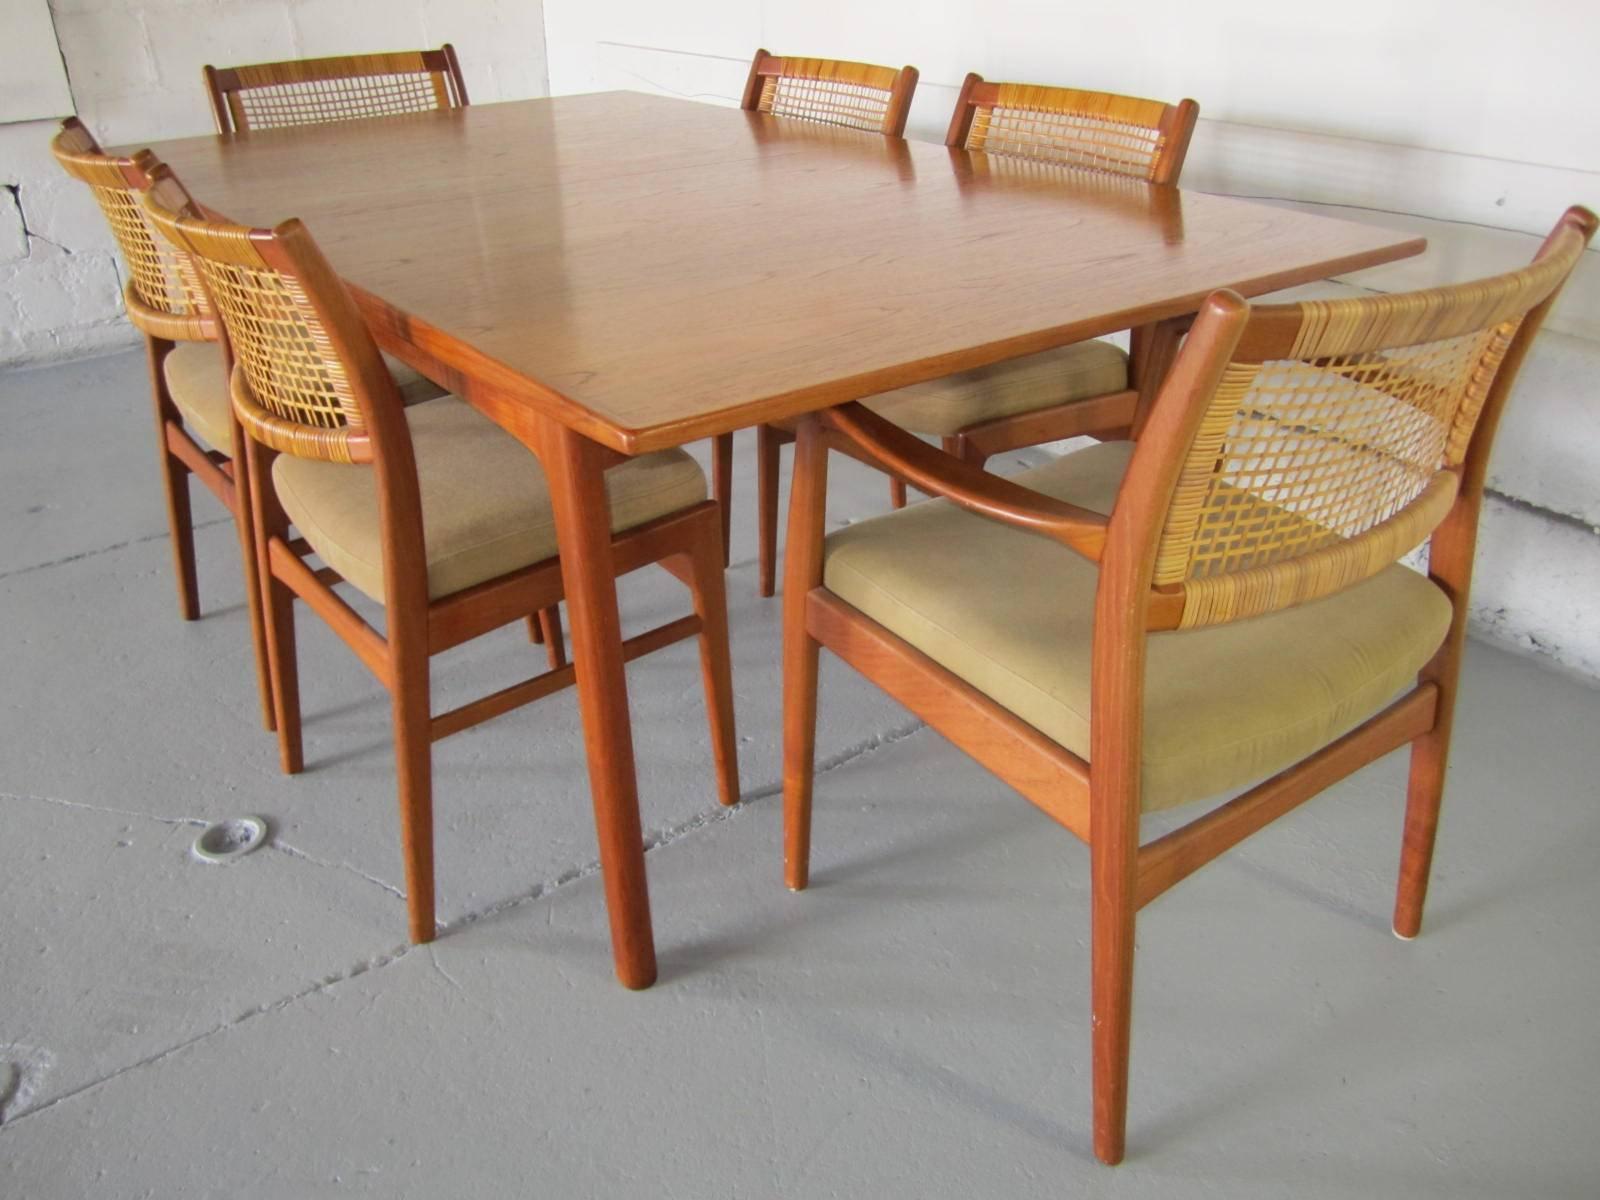 Stunning Sylve Stenquist Dux Teak Dining Table with 2 Leaves Danish Modern 4